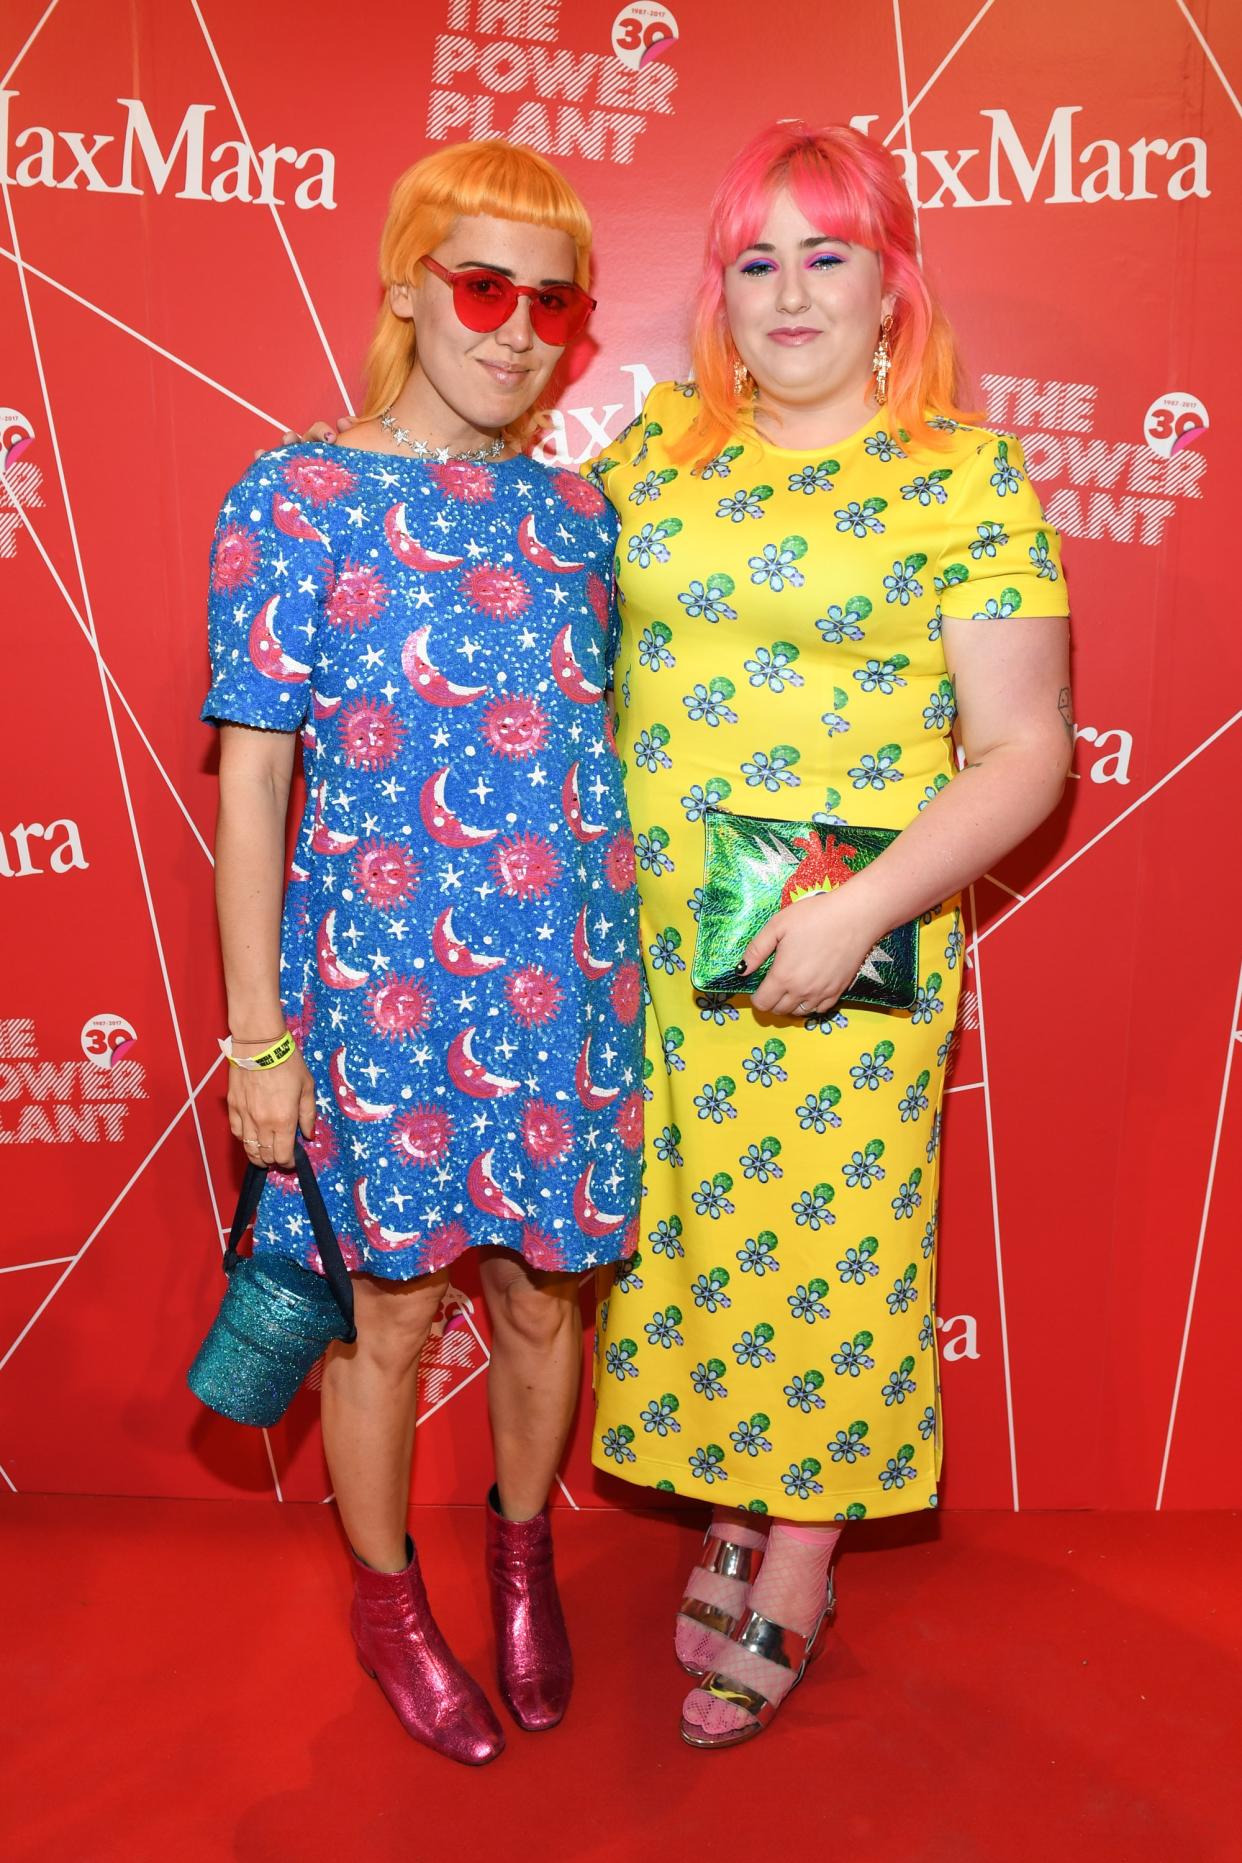 TORONTO, ON – JUNE 01: Shar DaSilva and Hayley Elsaesser attend Power Ball XIX: Stereo Vision Presented By Max Mara at The Power Plant on June 1, 2017 in Toronto, Canada. (Photo by Sonia Recchia/Getty Images for Max Mara)